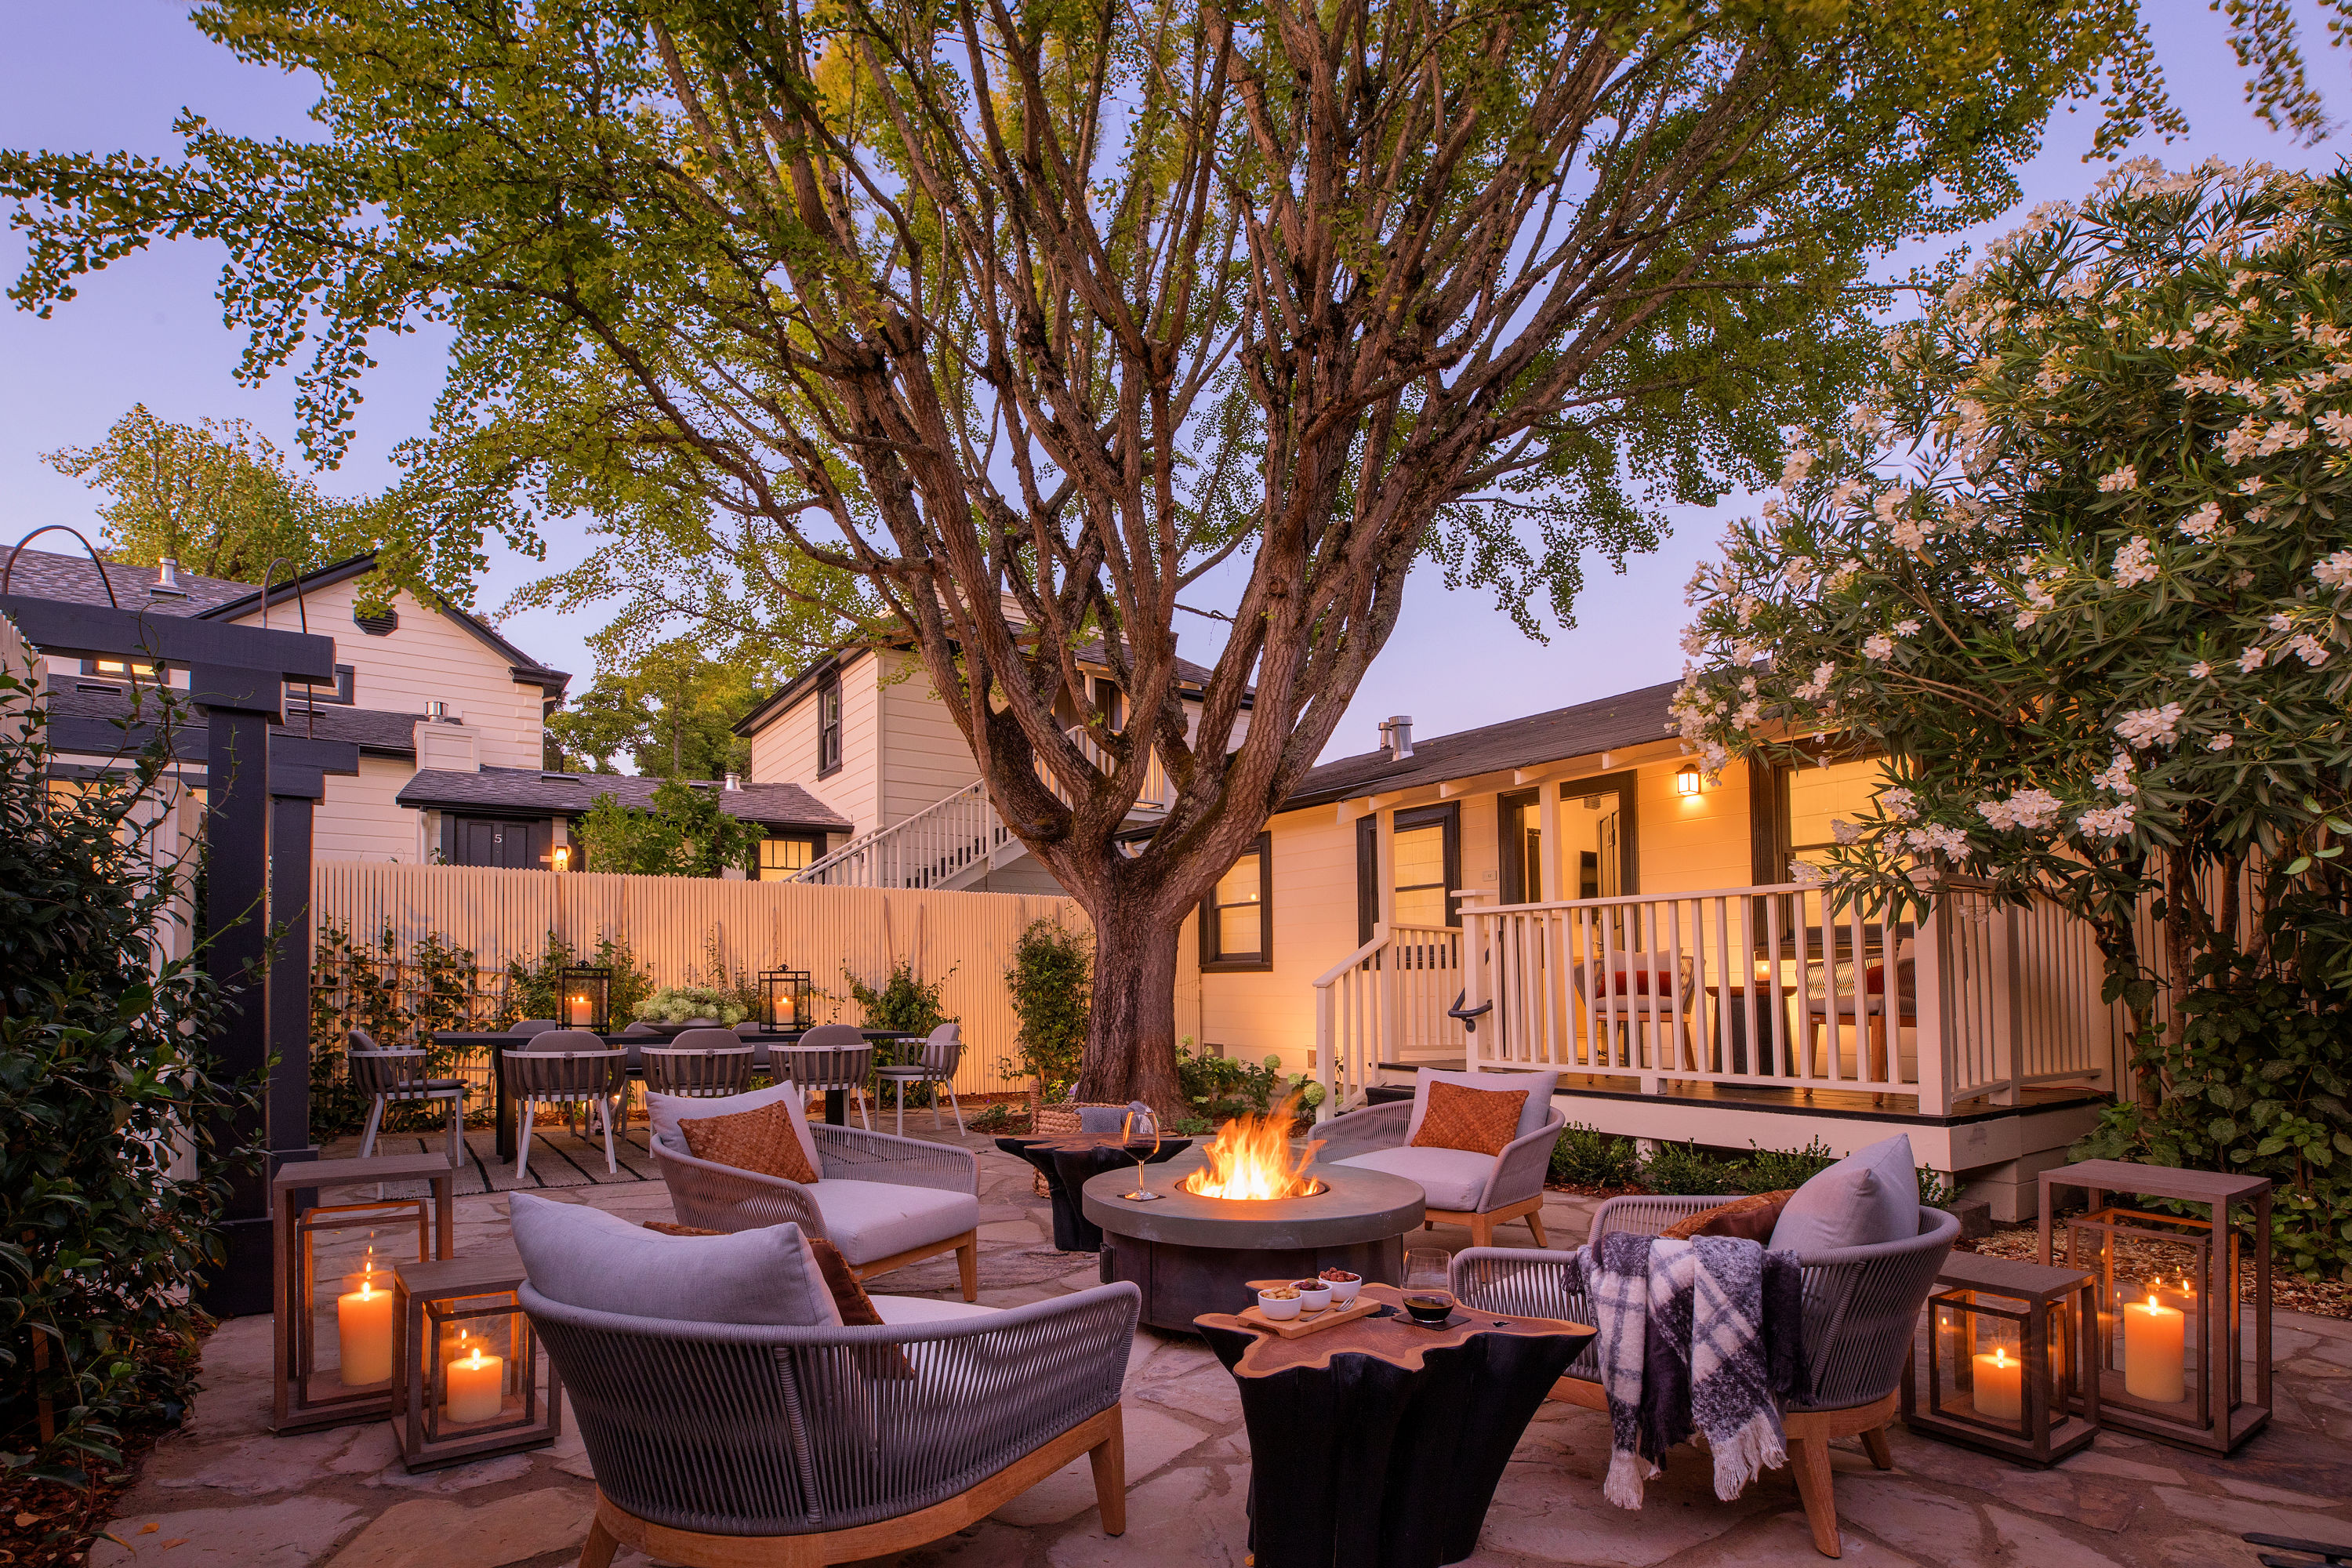 Wicker chairs with cushions sit around a fireplace under a large tree in a backyard patio